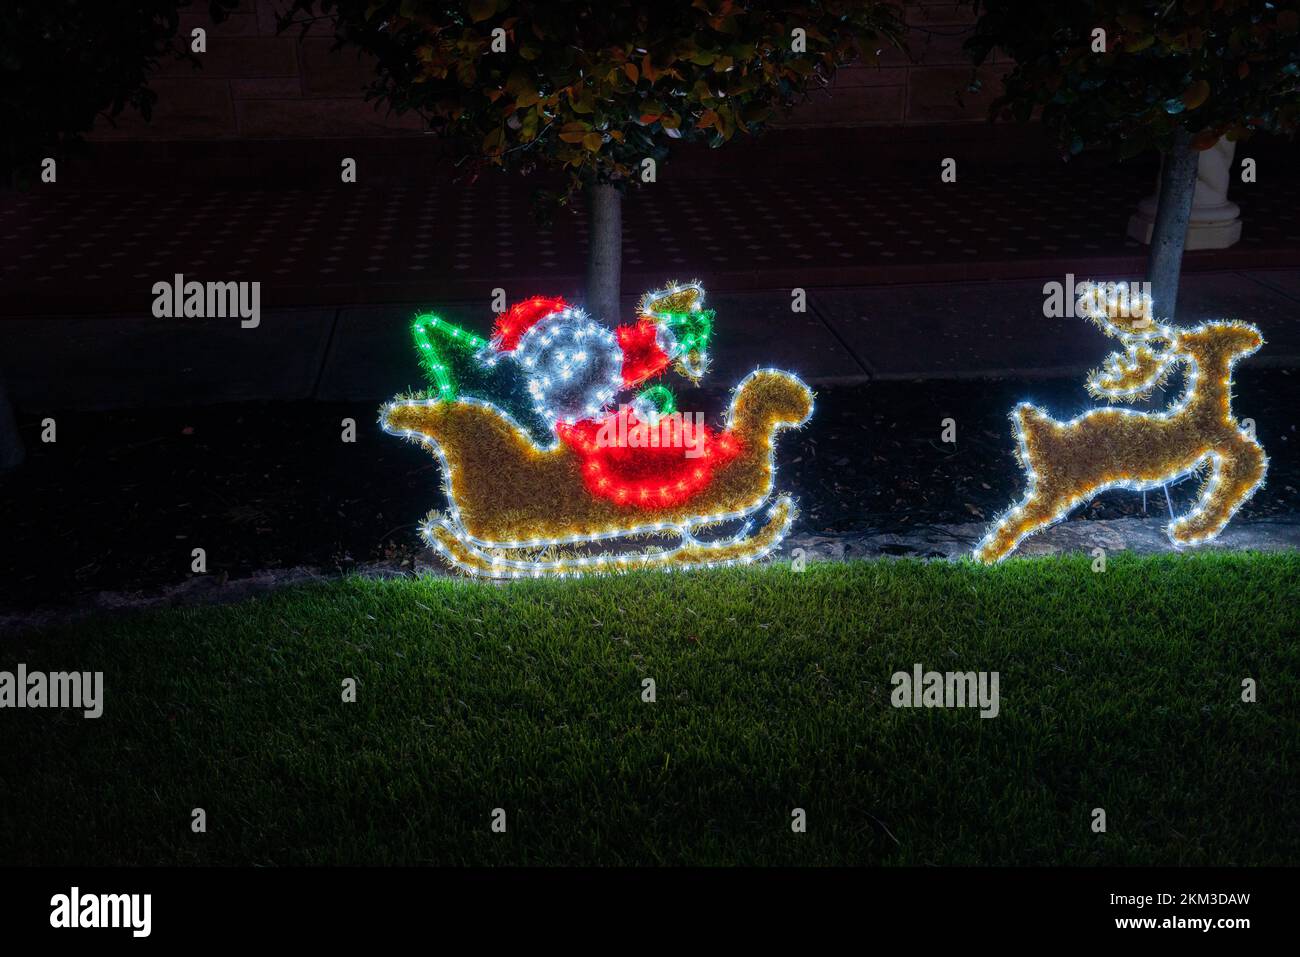 A Santa Claus on a sleigh and reindeer are illuminated  on the front garden of a residential house in Adelaide, South Australia Stock Photo